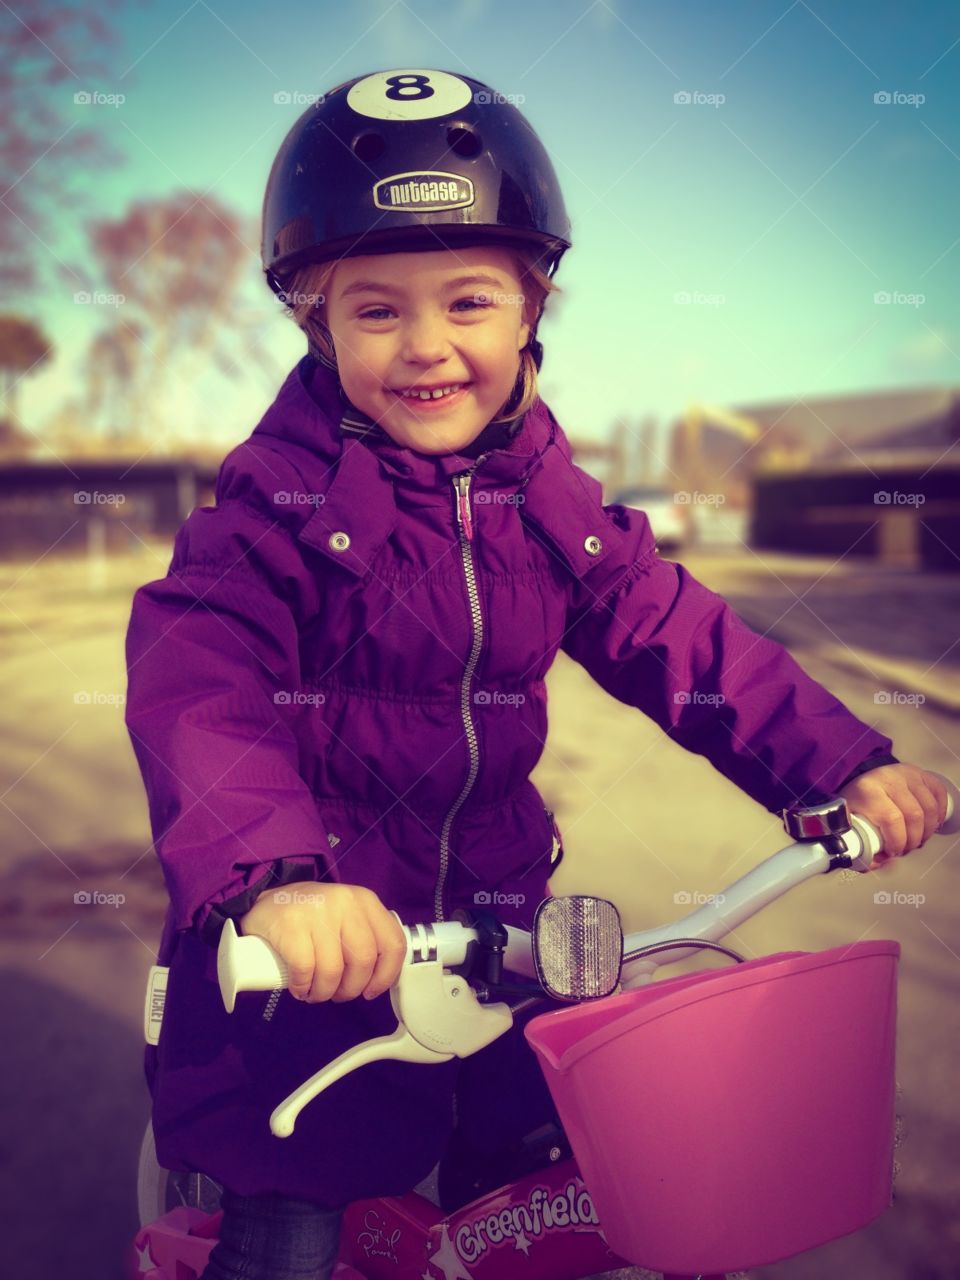 Girl on bicycle. Happy girl riding her first bike